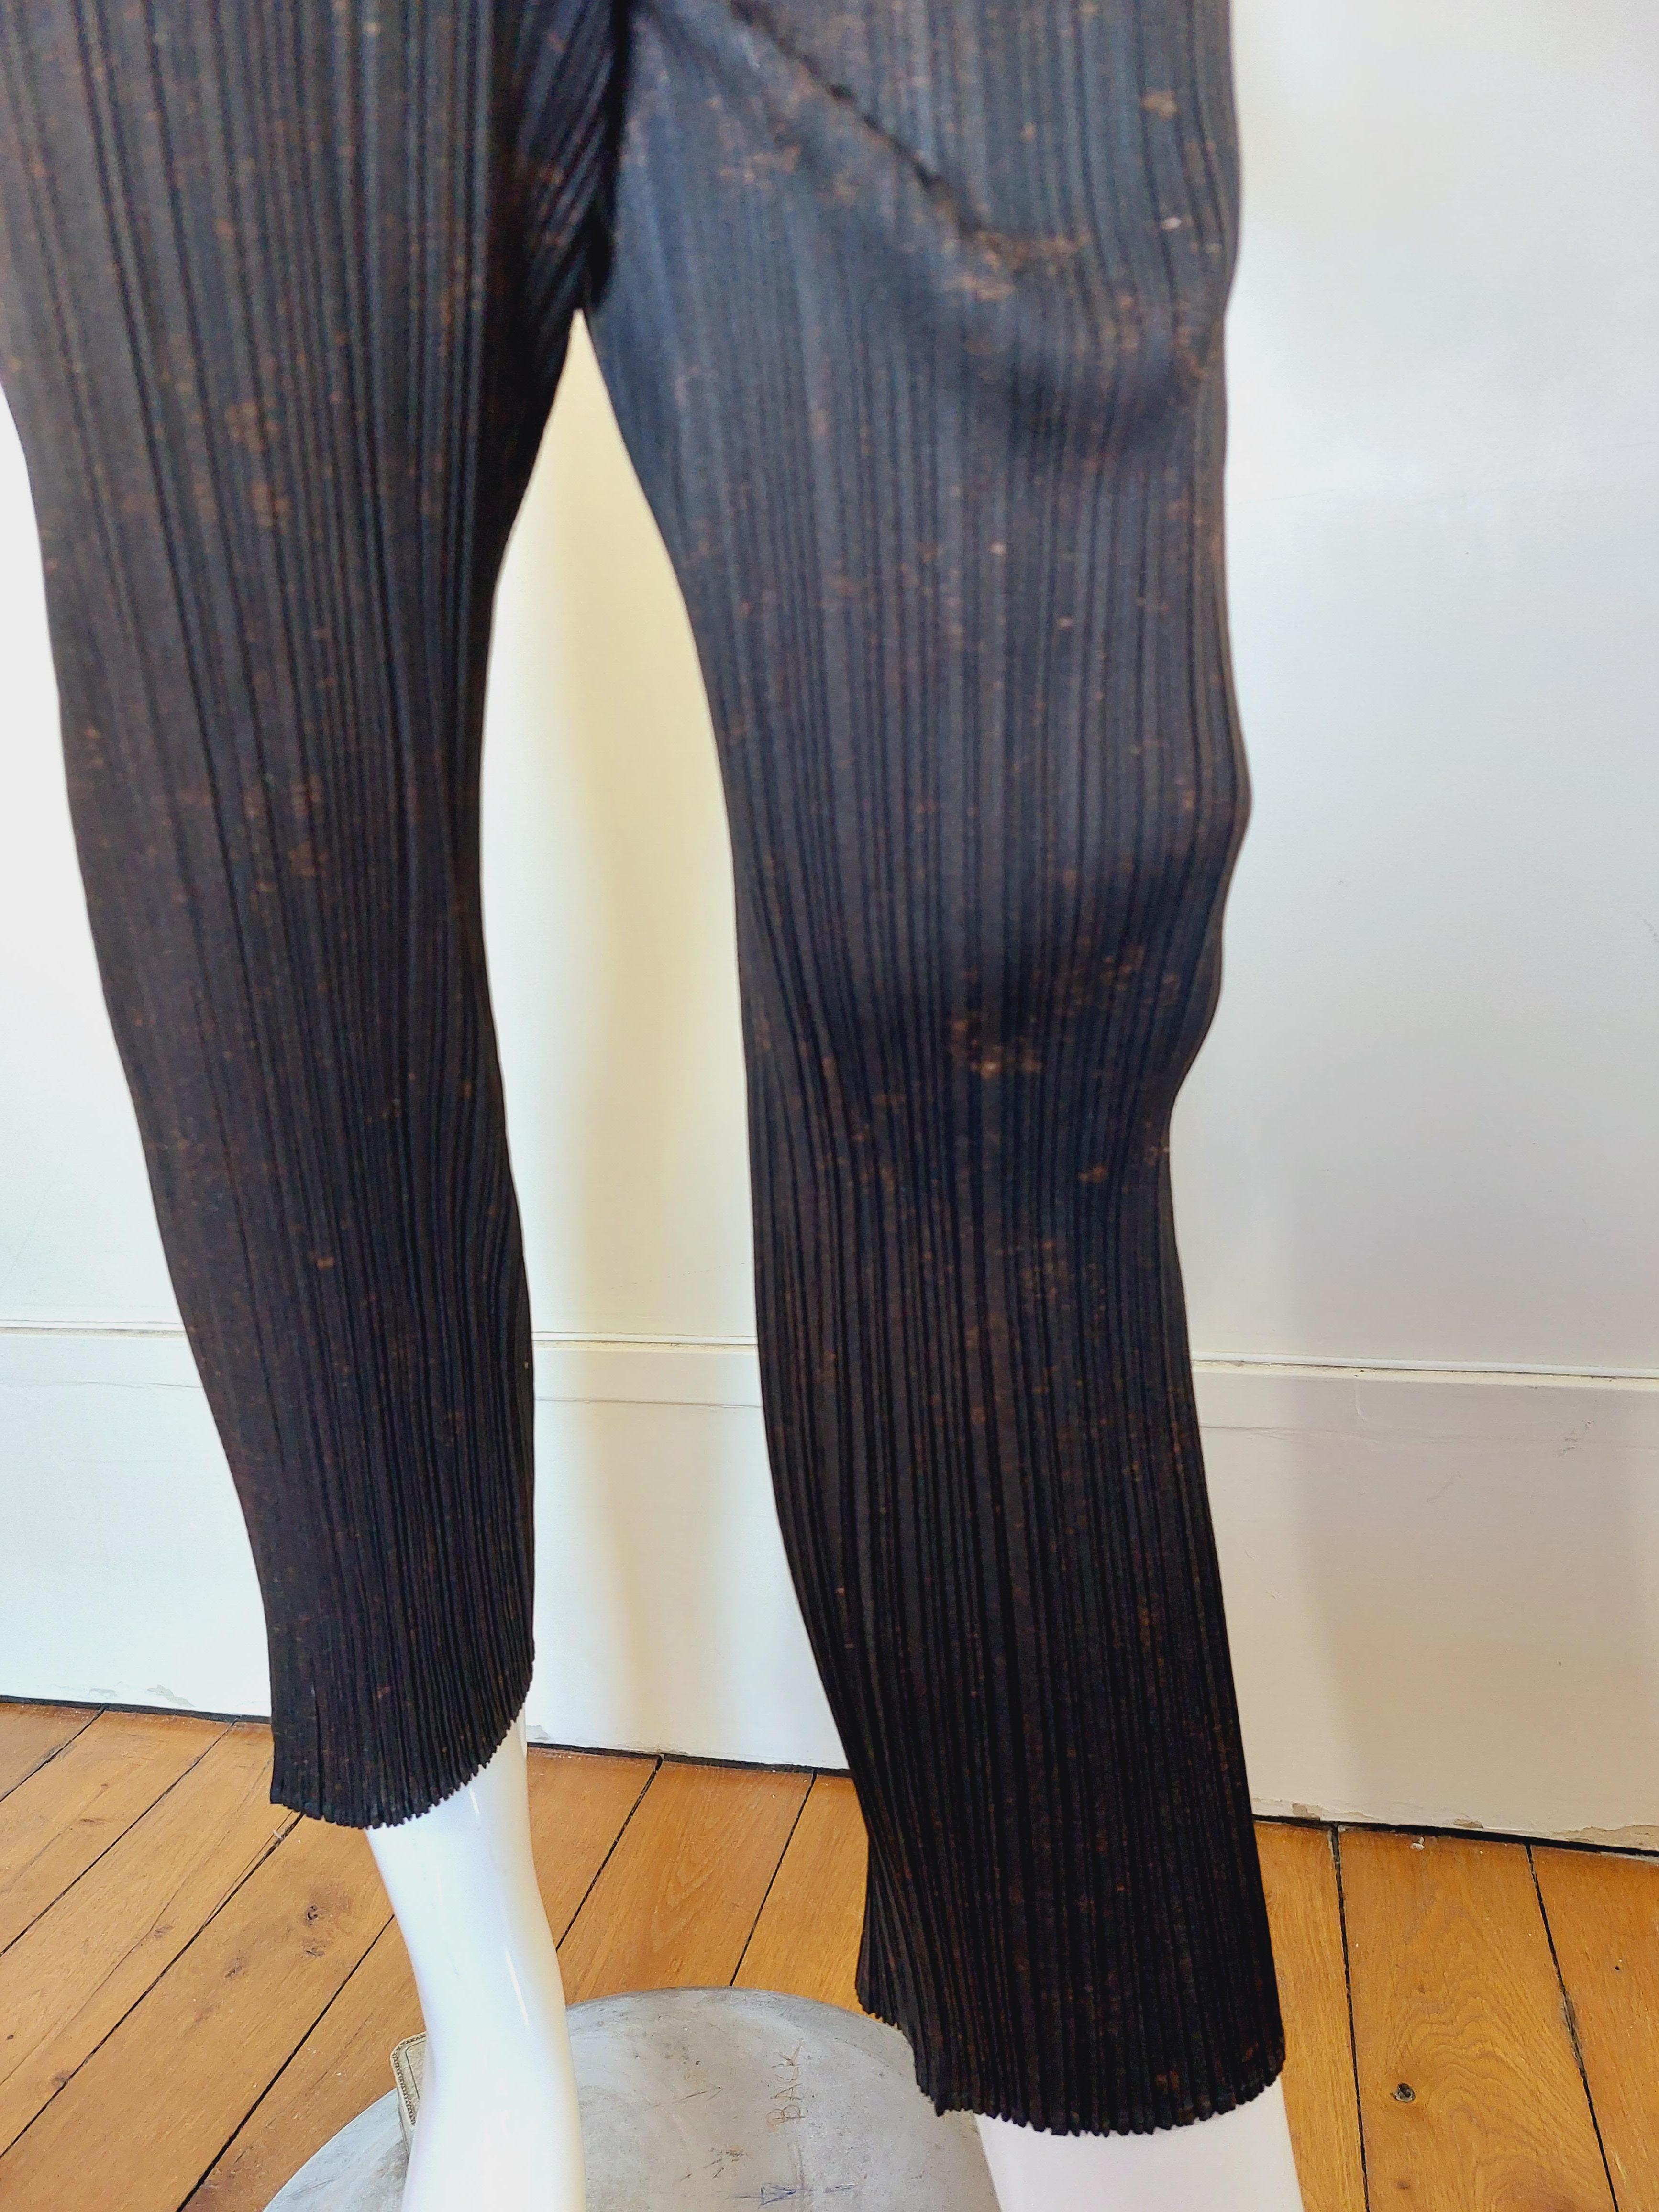 Women's or Men's Pleats Please Issey Miyake Guest Artist Series No. 4 Cai Guo-Qiang Bullet Pants  For Sale